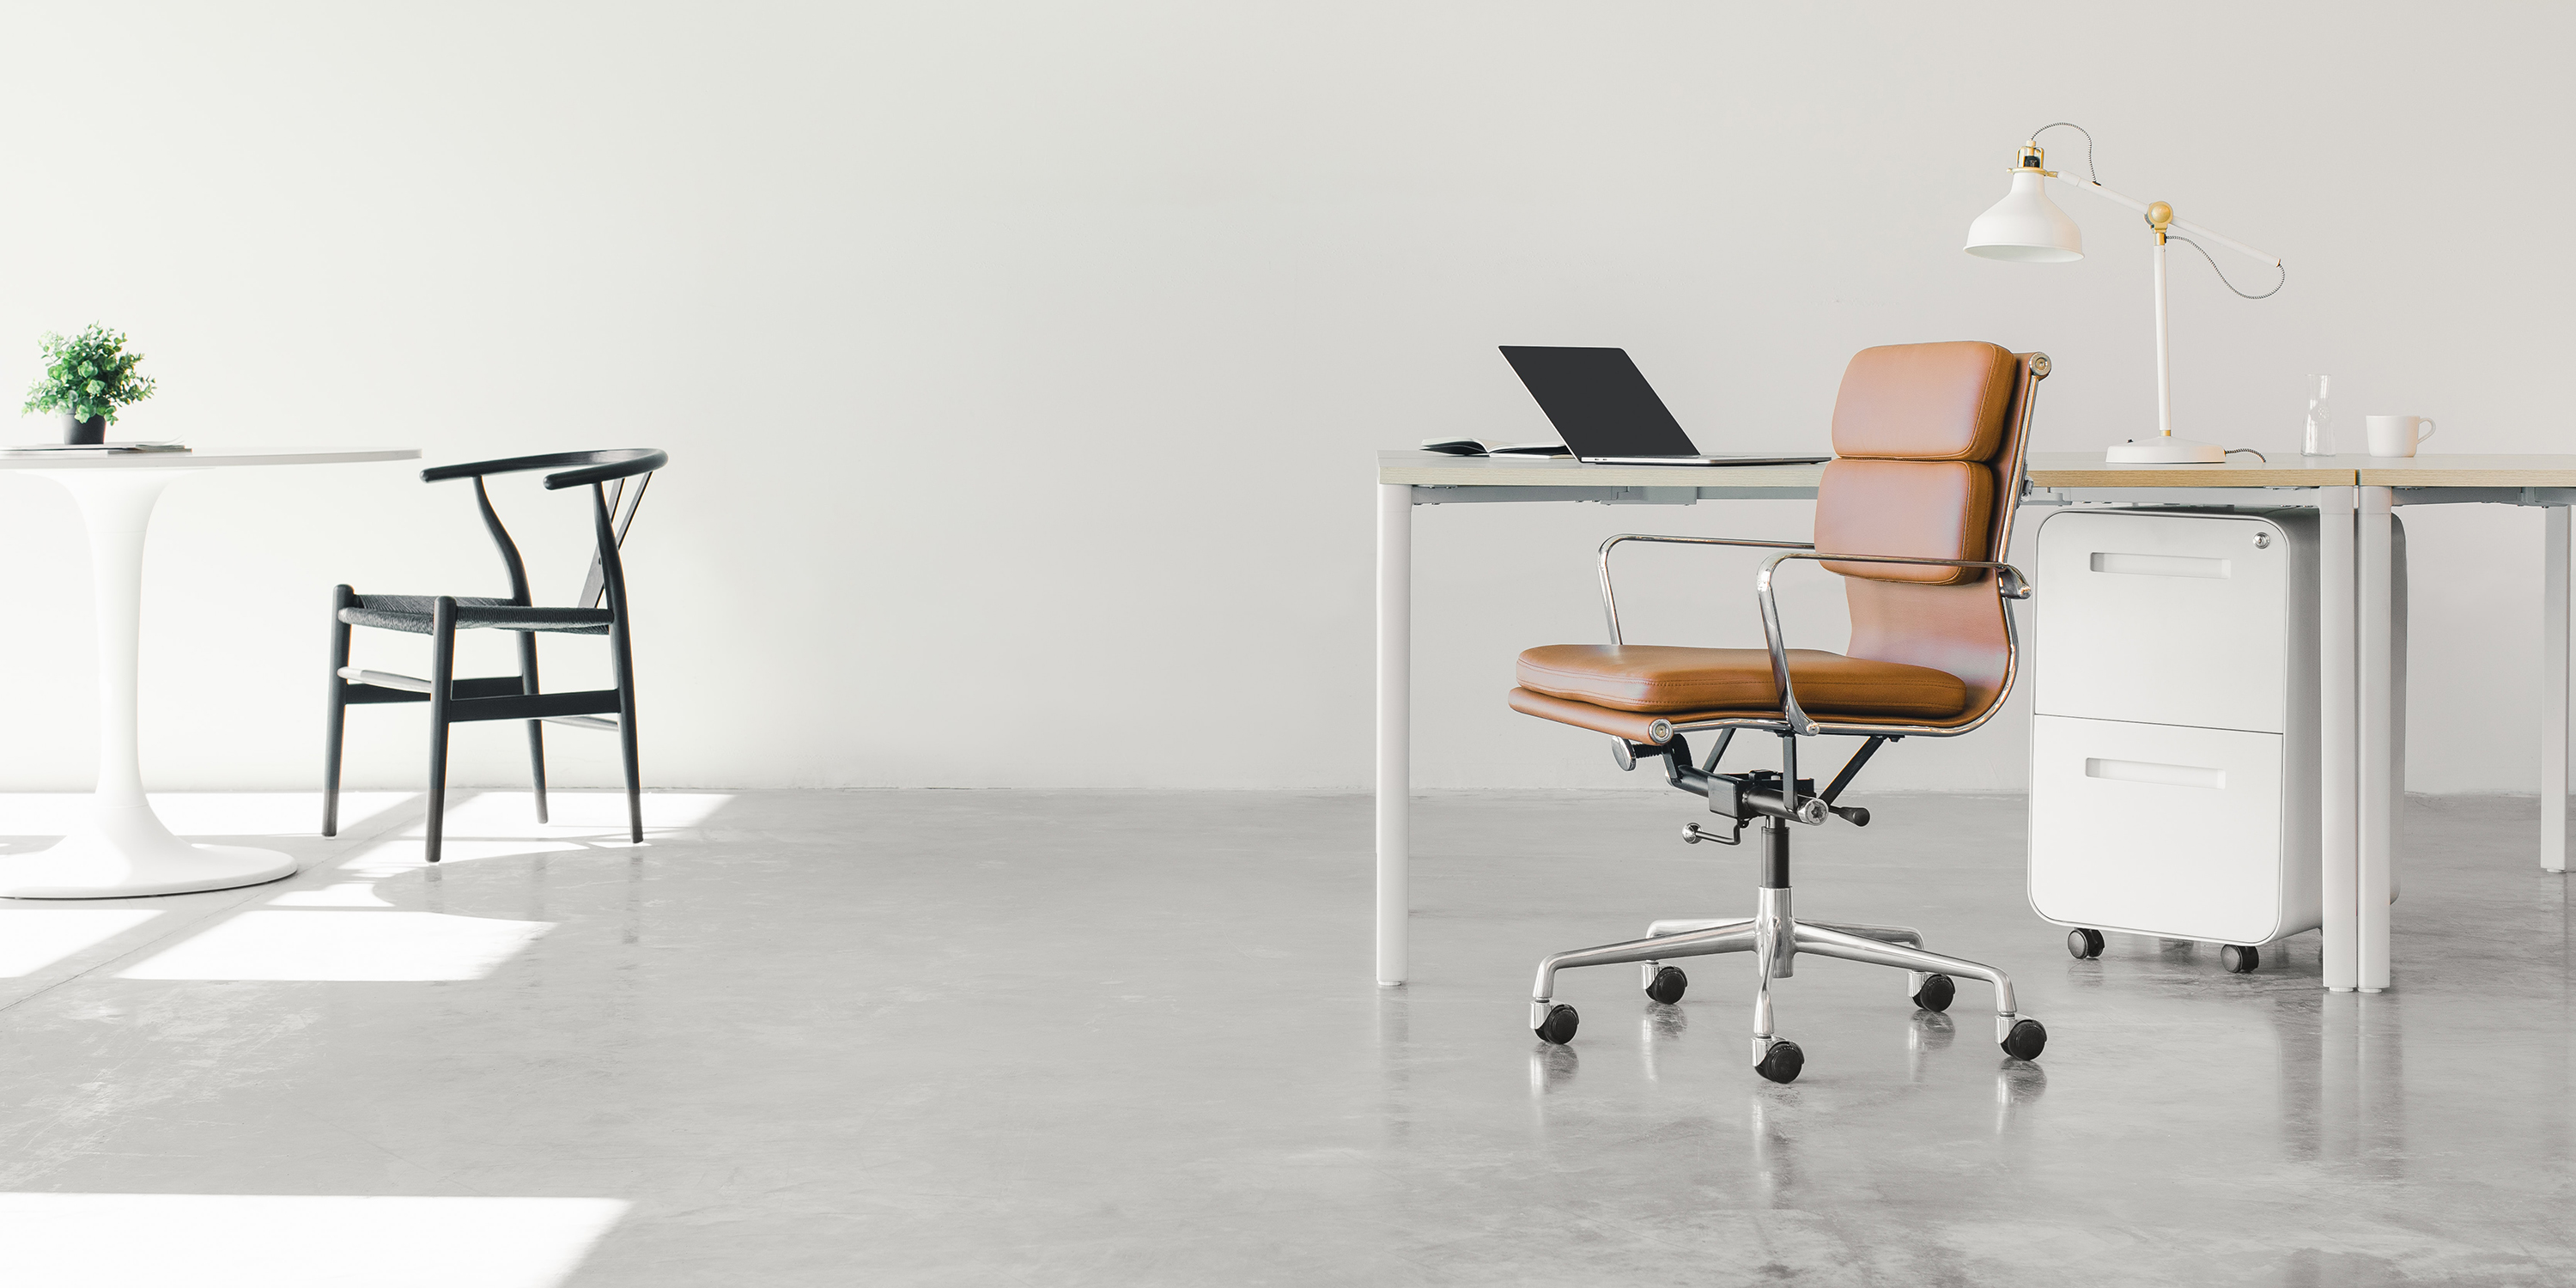 Swivel chair and basic office furniture in light minimal office space